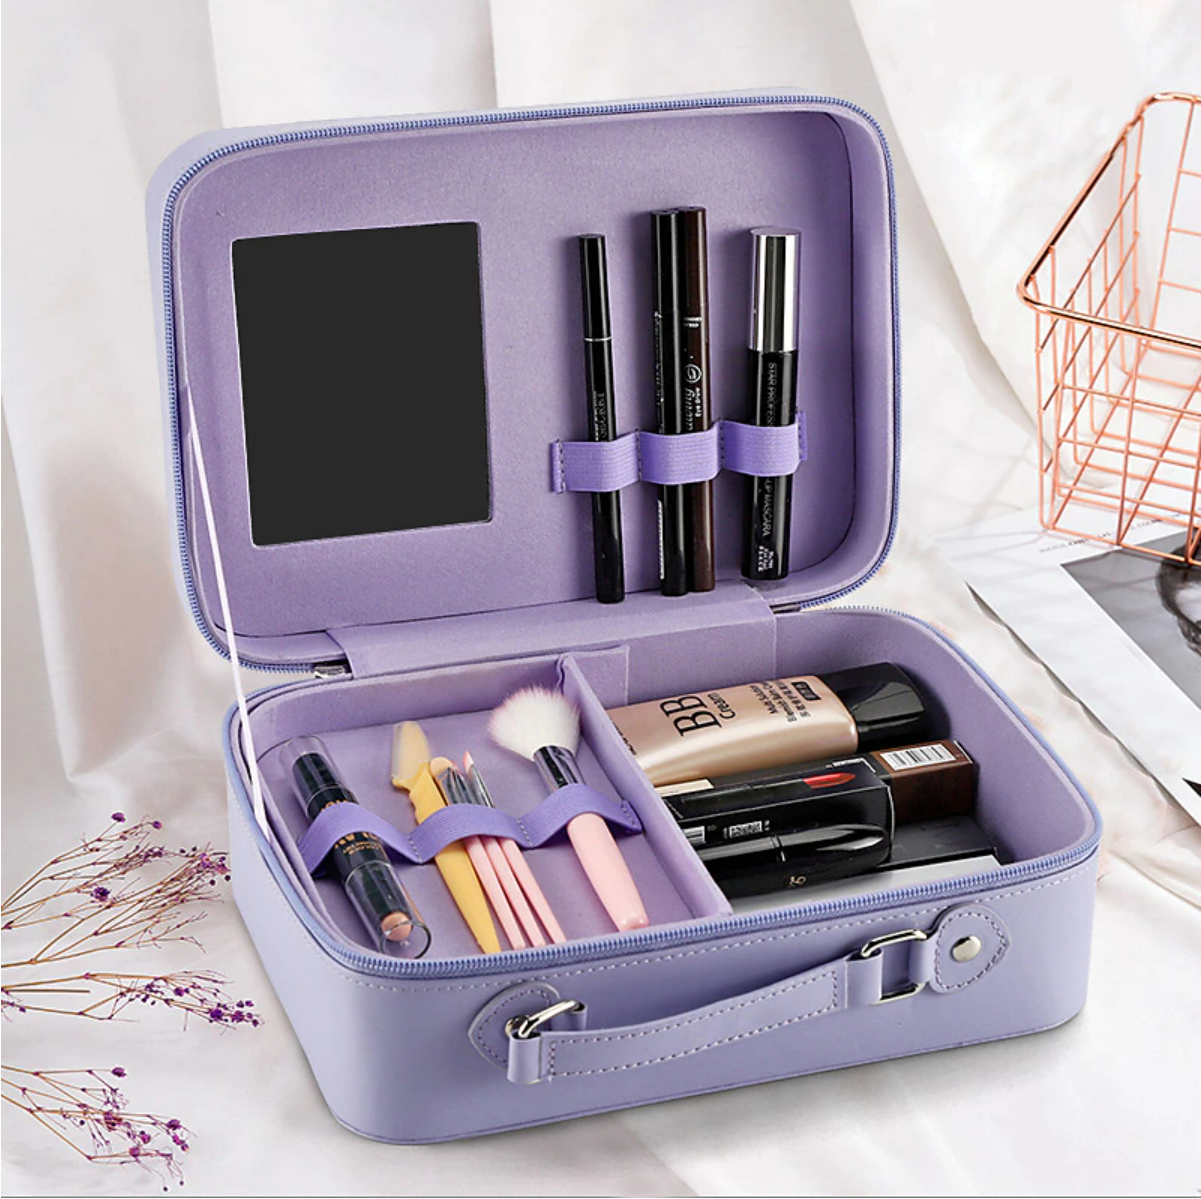 Double Layer Travel Makeup Bag Portable Cosmetic Bag with Divider Organizer Case for Storage Cosmetics Make up Brush Large Capacity Toiletry Bag for Women and Girls